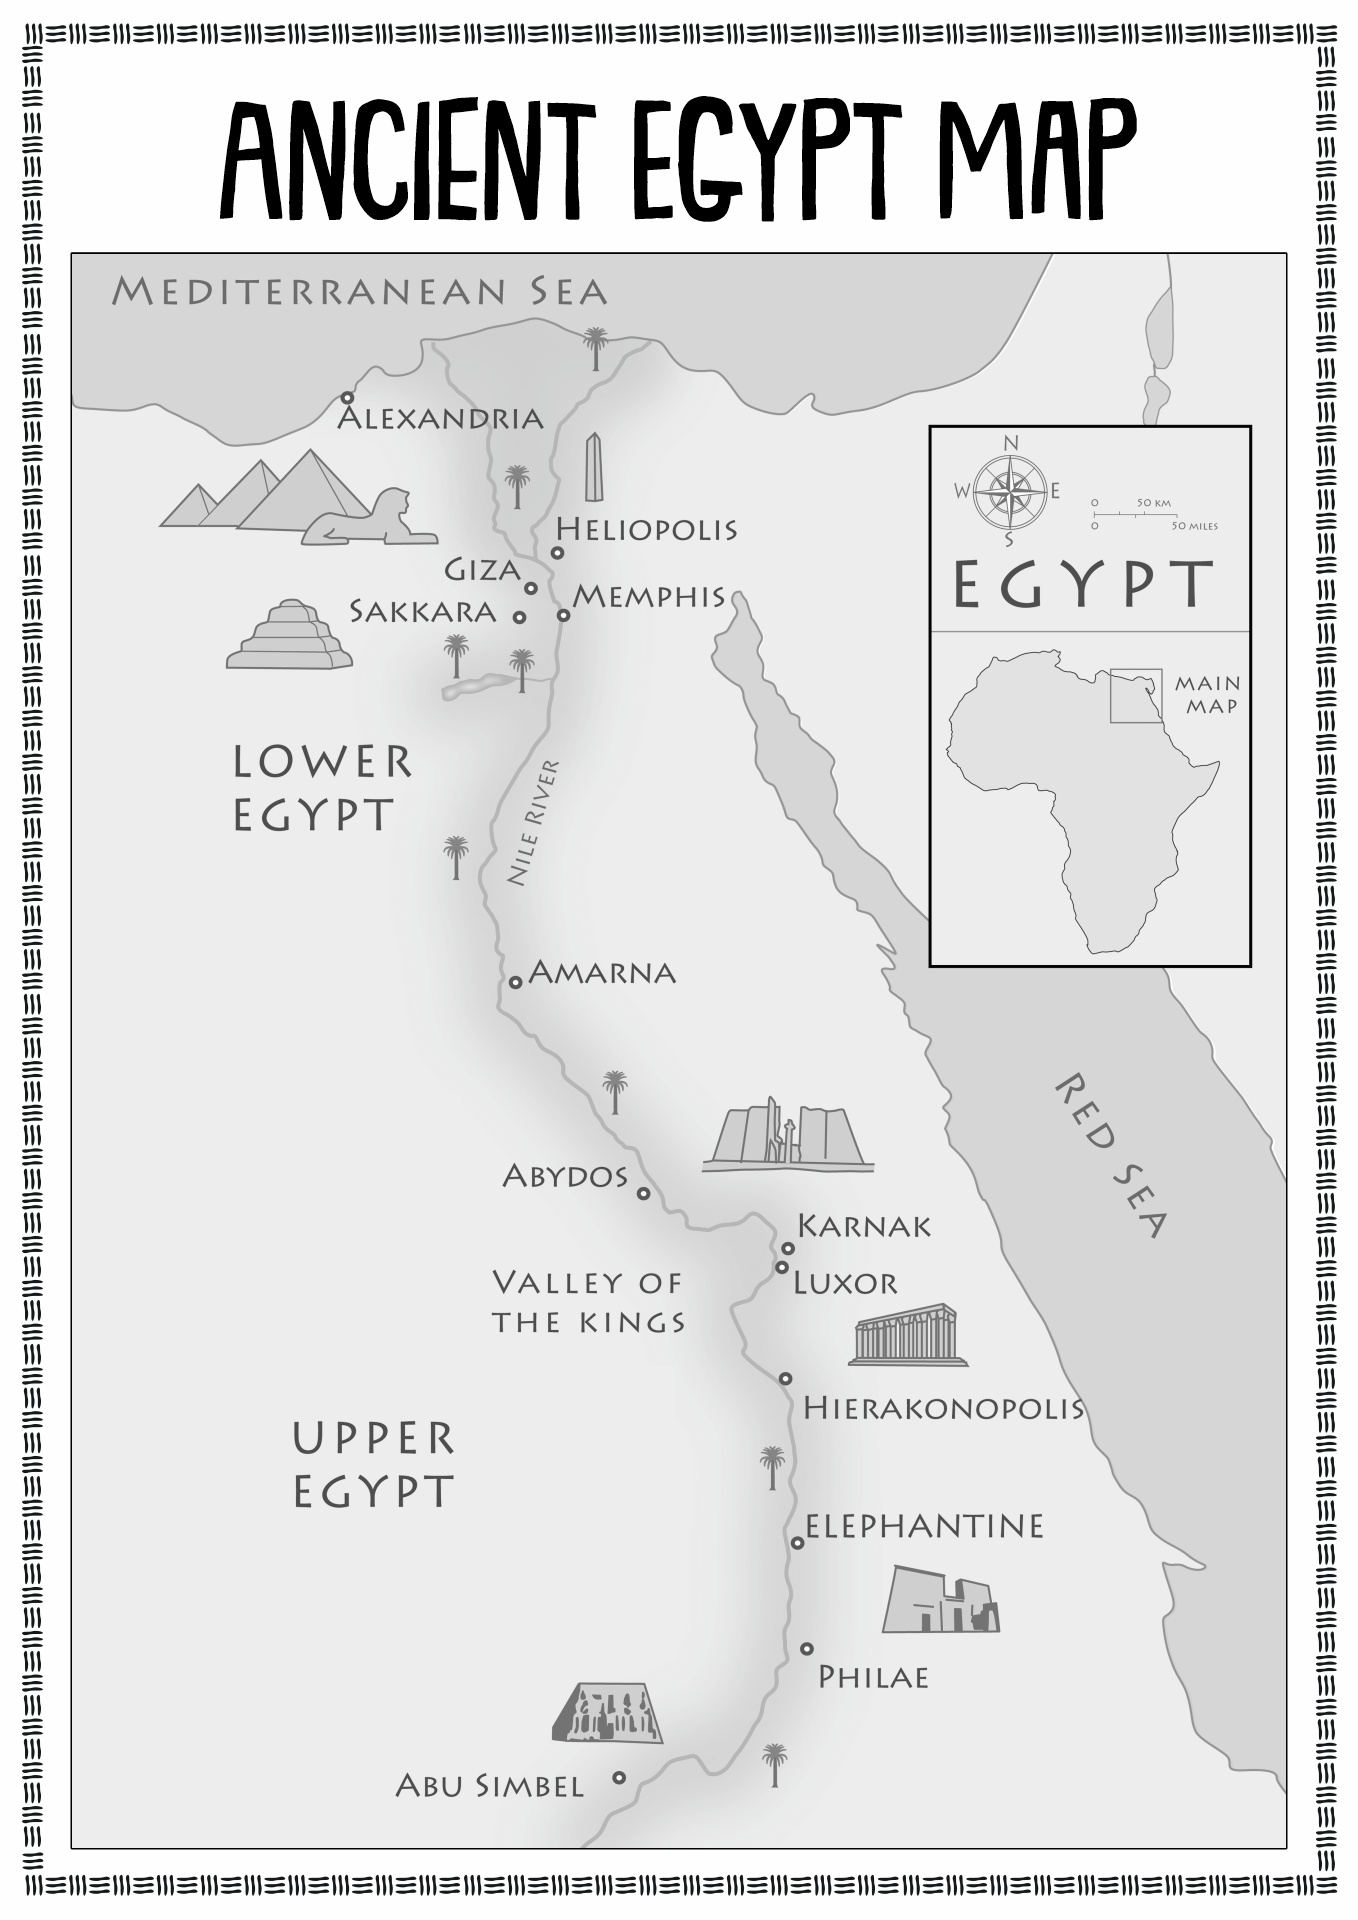 Ancient Egypt Map Black and White Image